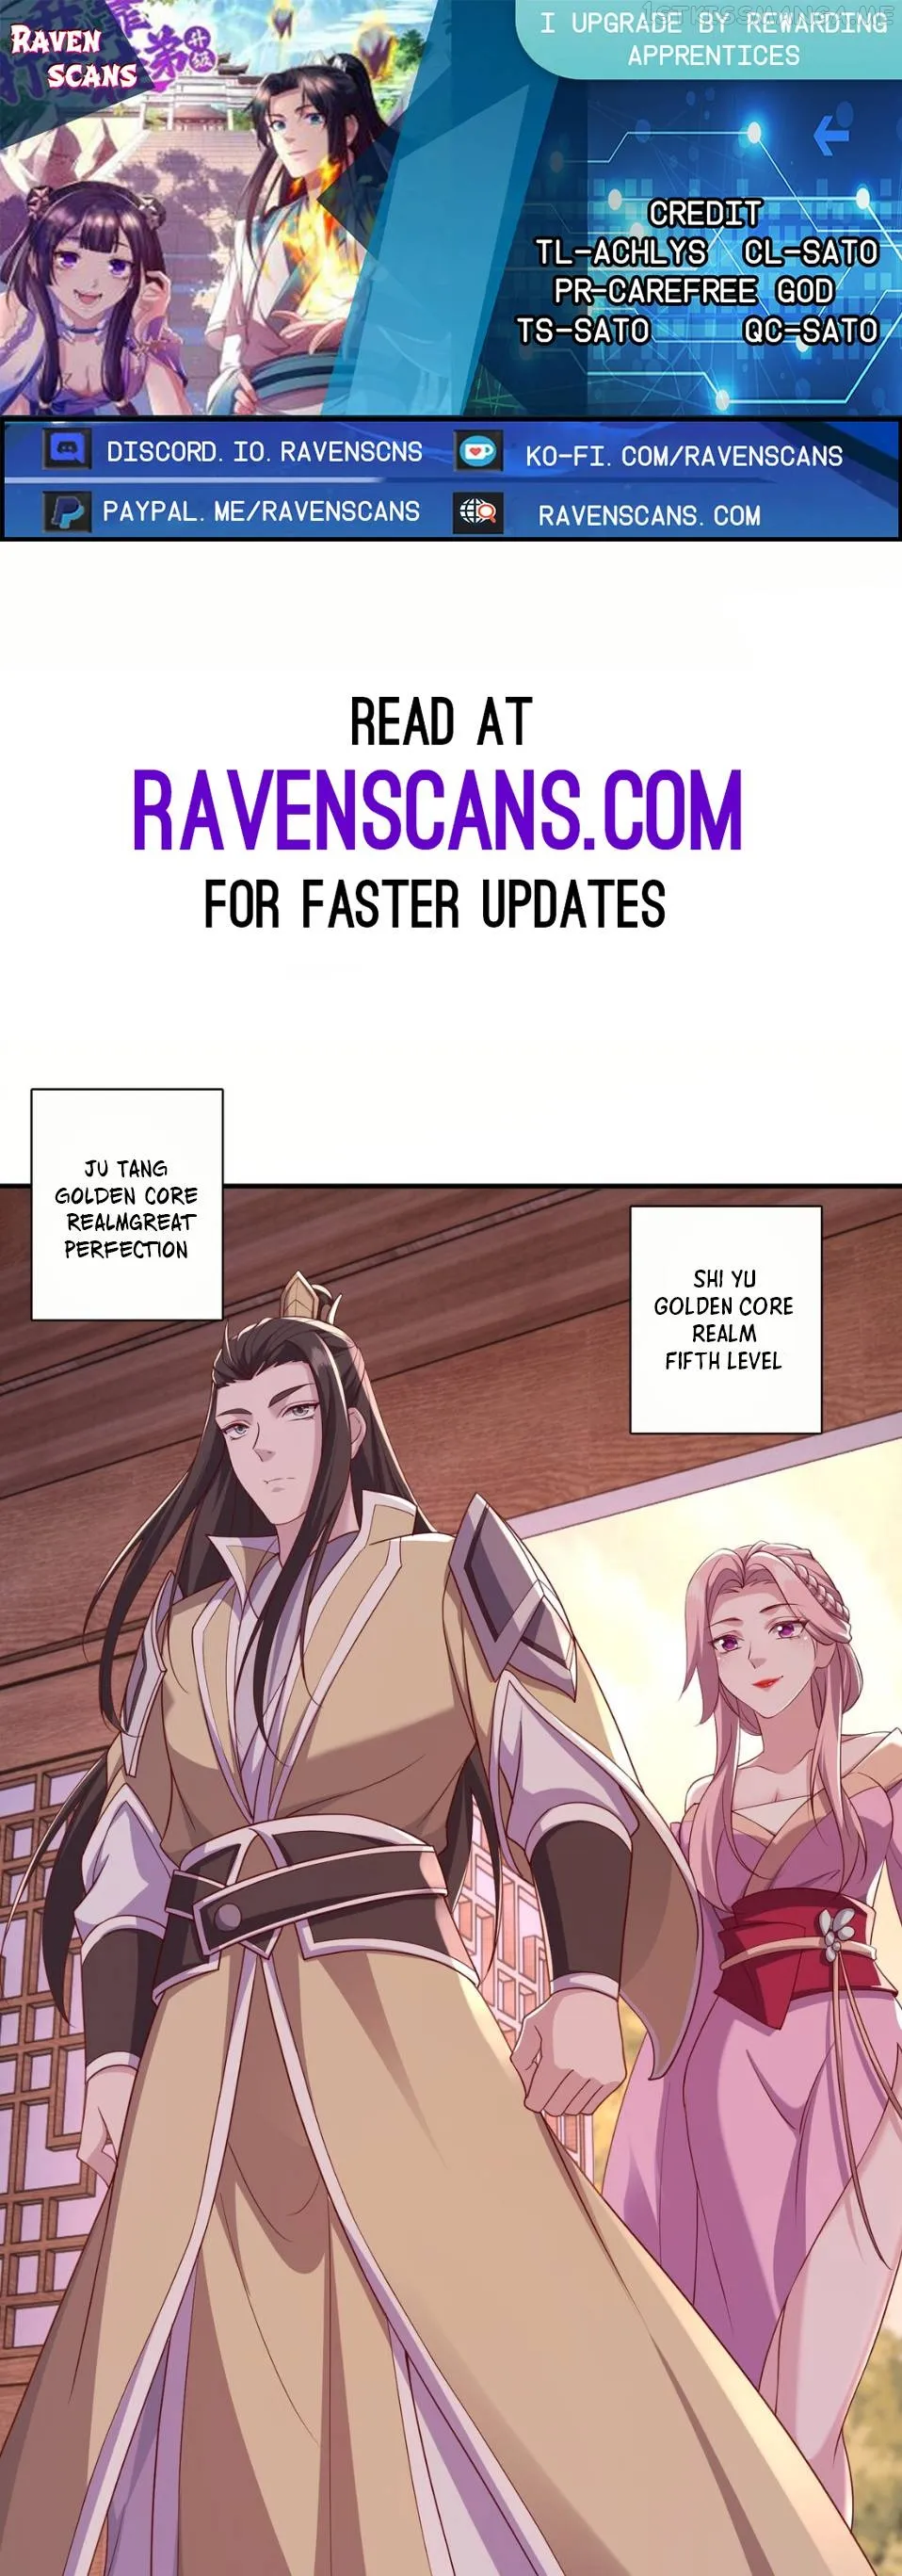 I Upgrade by Rewarding Apprentices chapter 24